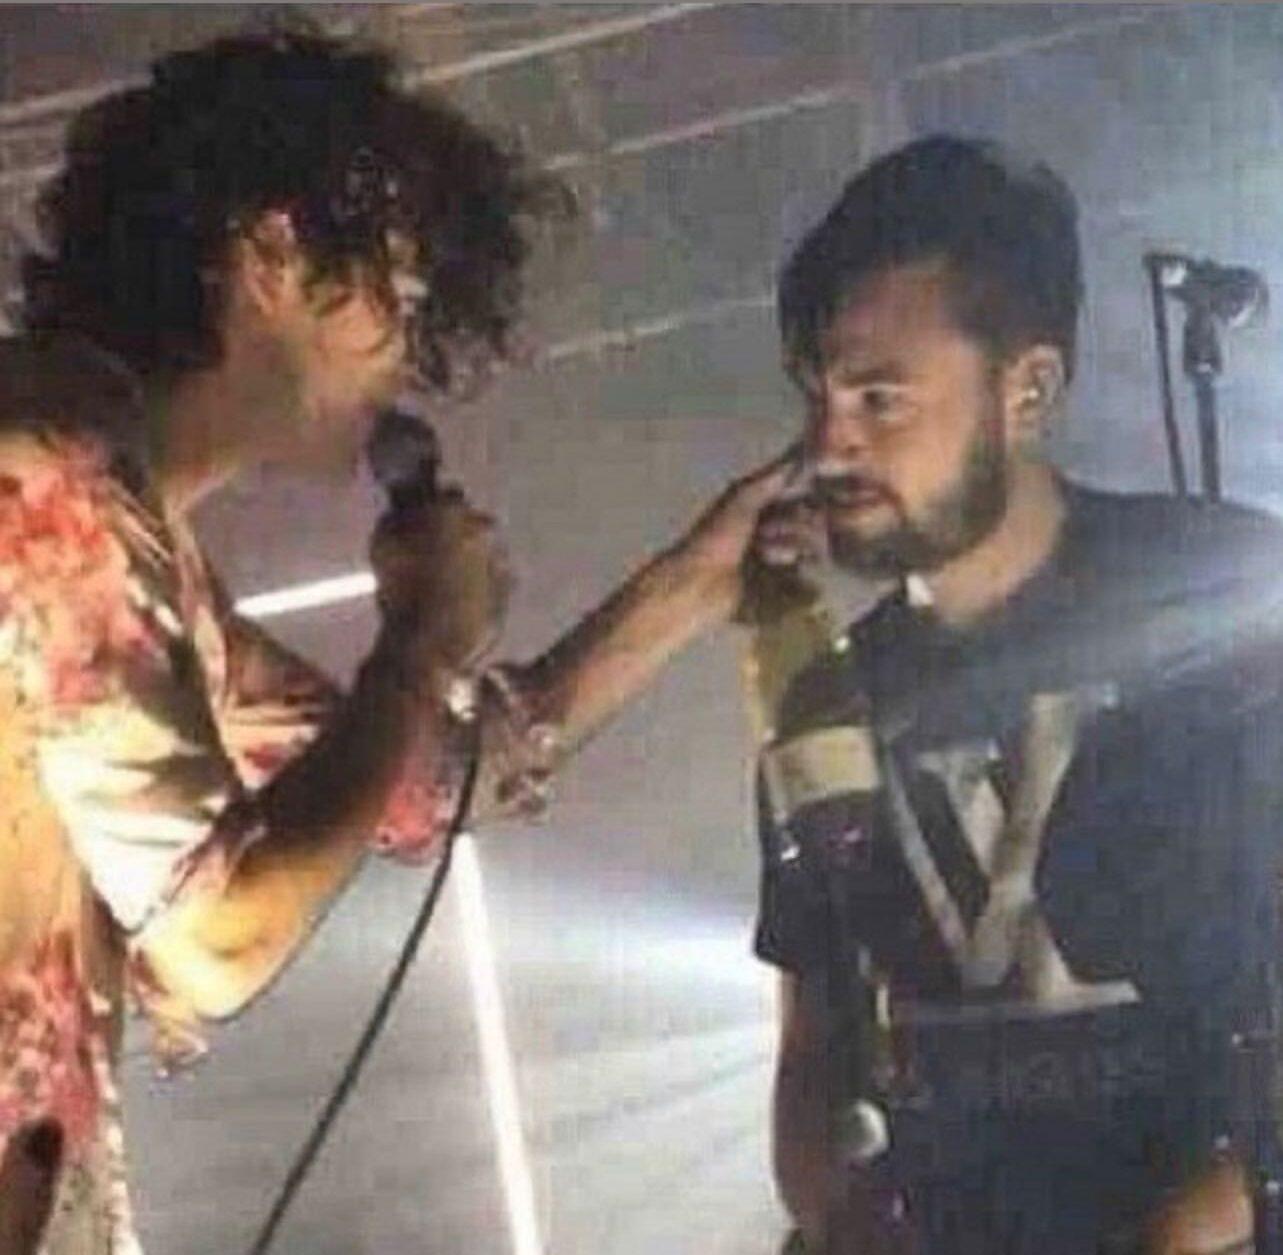 Matty Healy Mocks Malaysian Government Ban On The 1975 After Kissing Male Bandmate On Stage